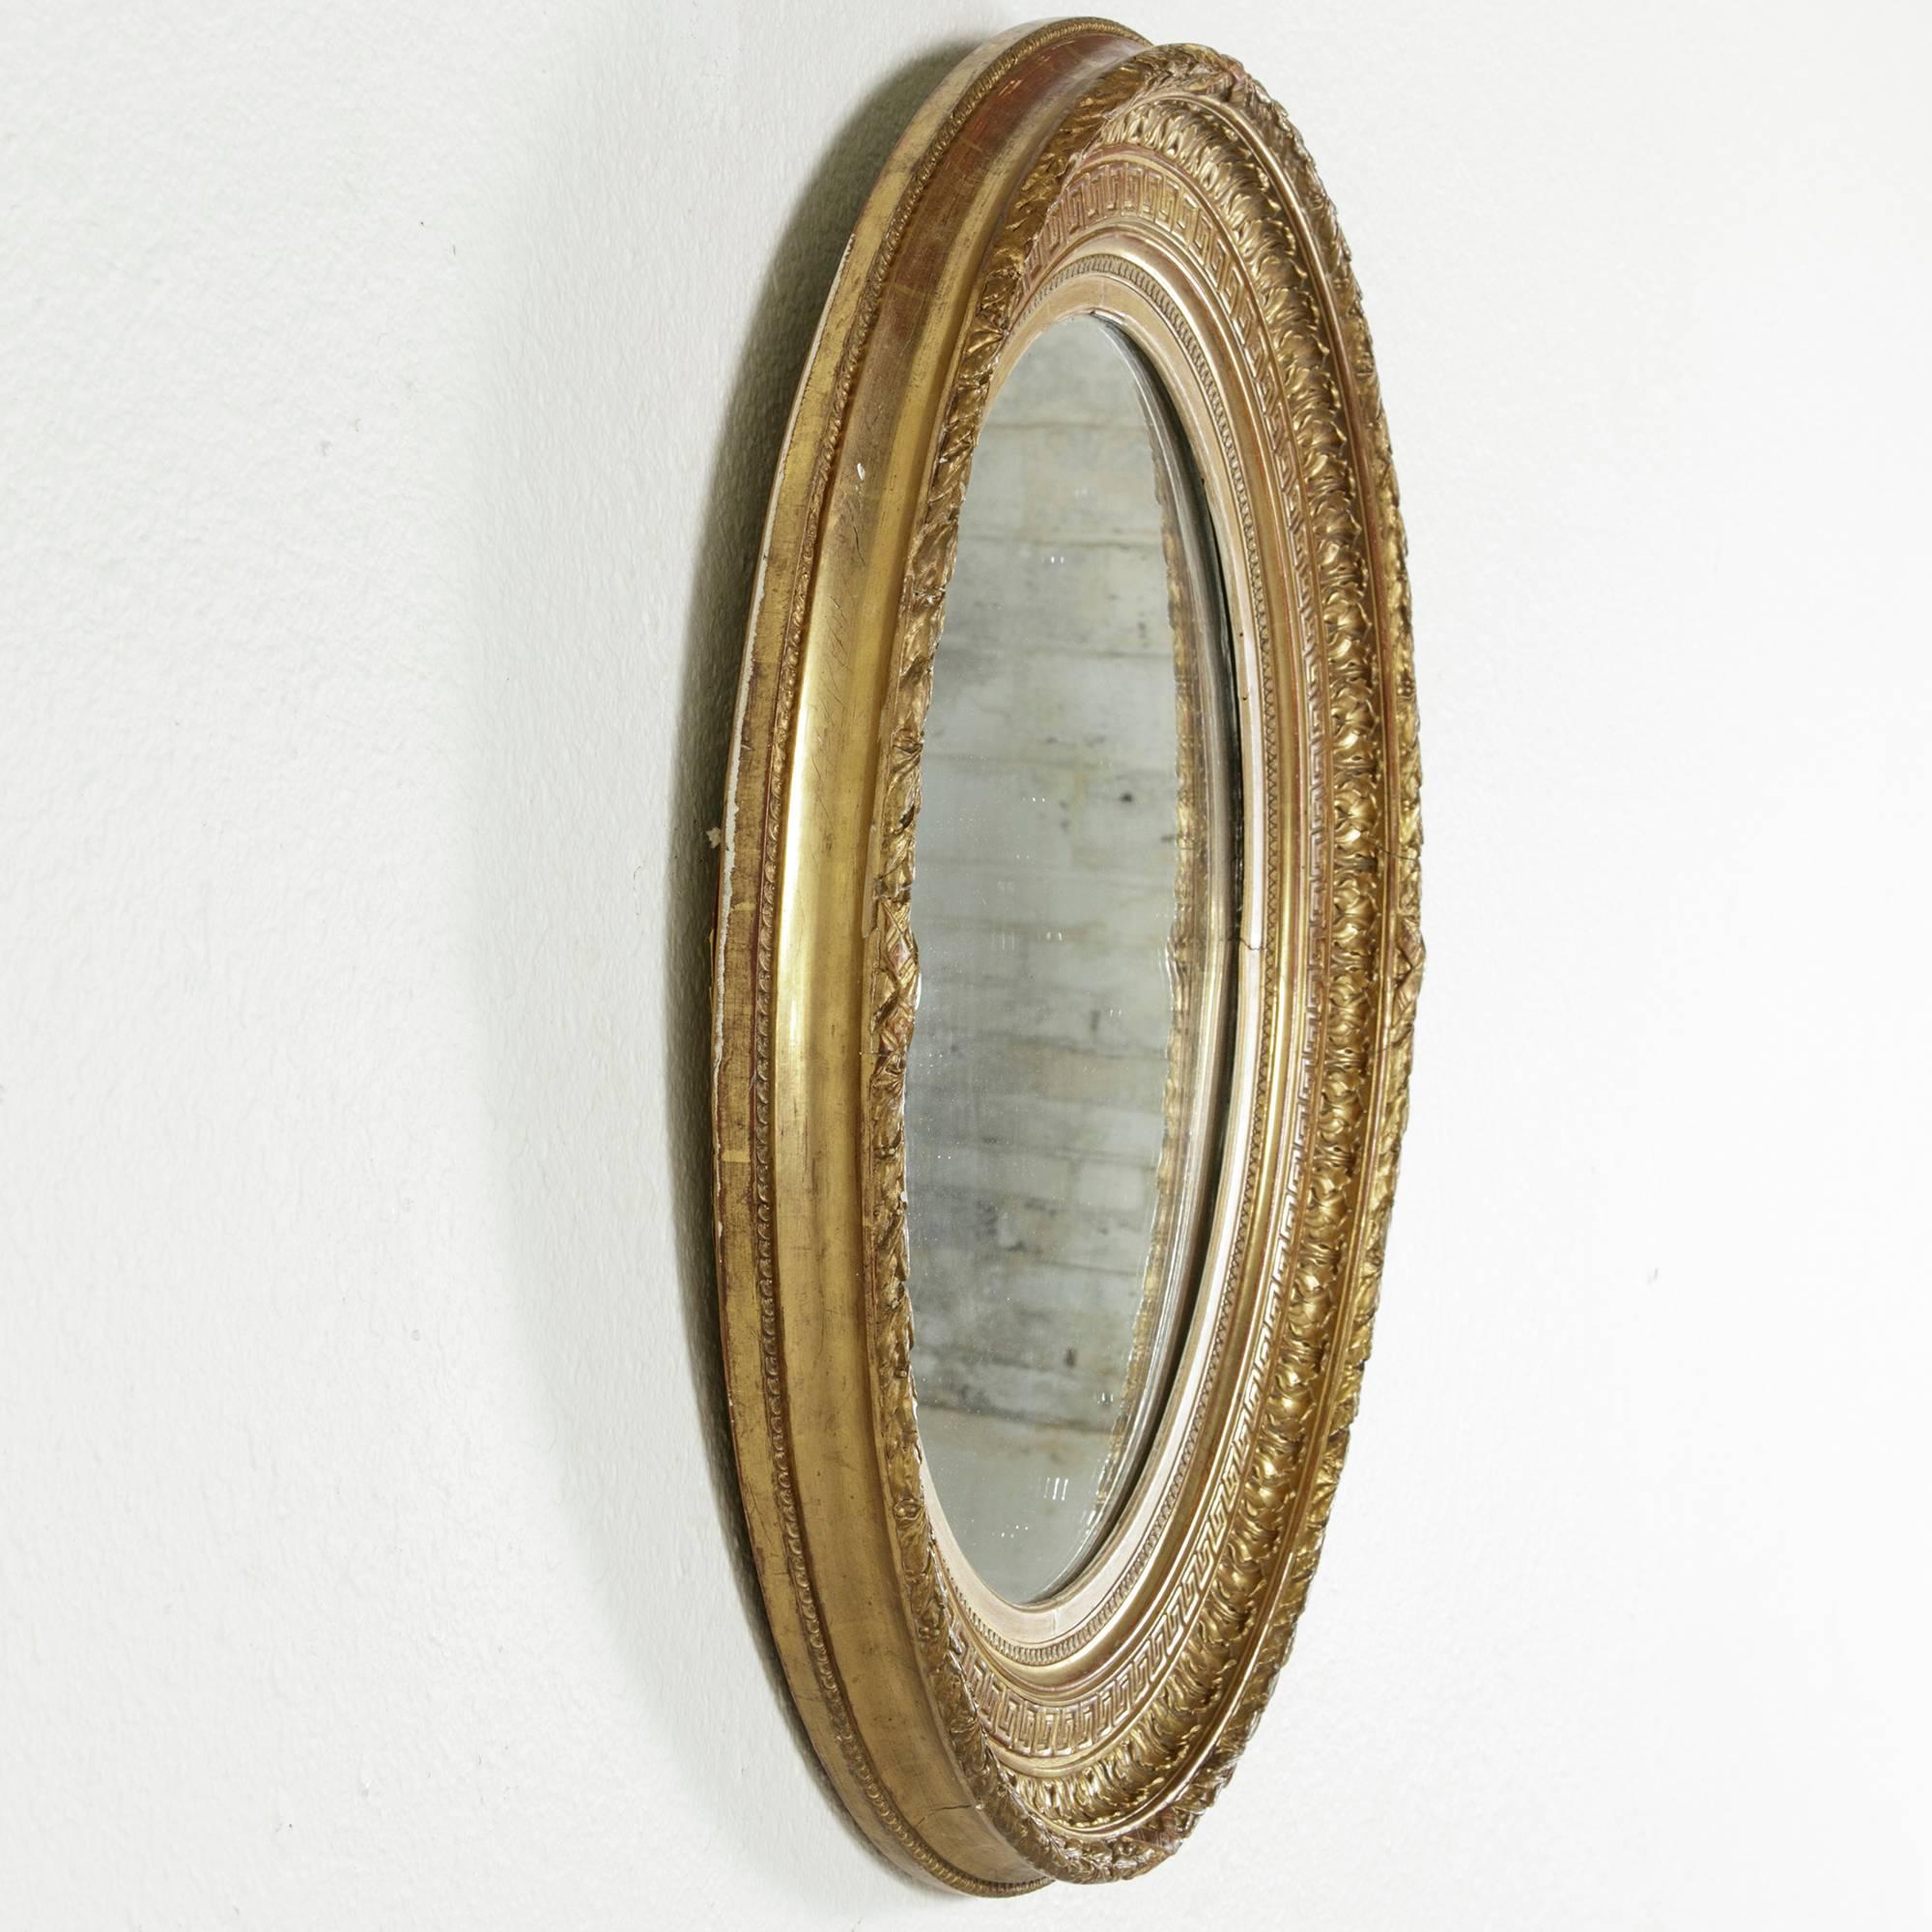 Napoleon III Small-Scale 19th Century Giltwood Oval Mirror with Greek Key